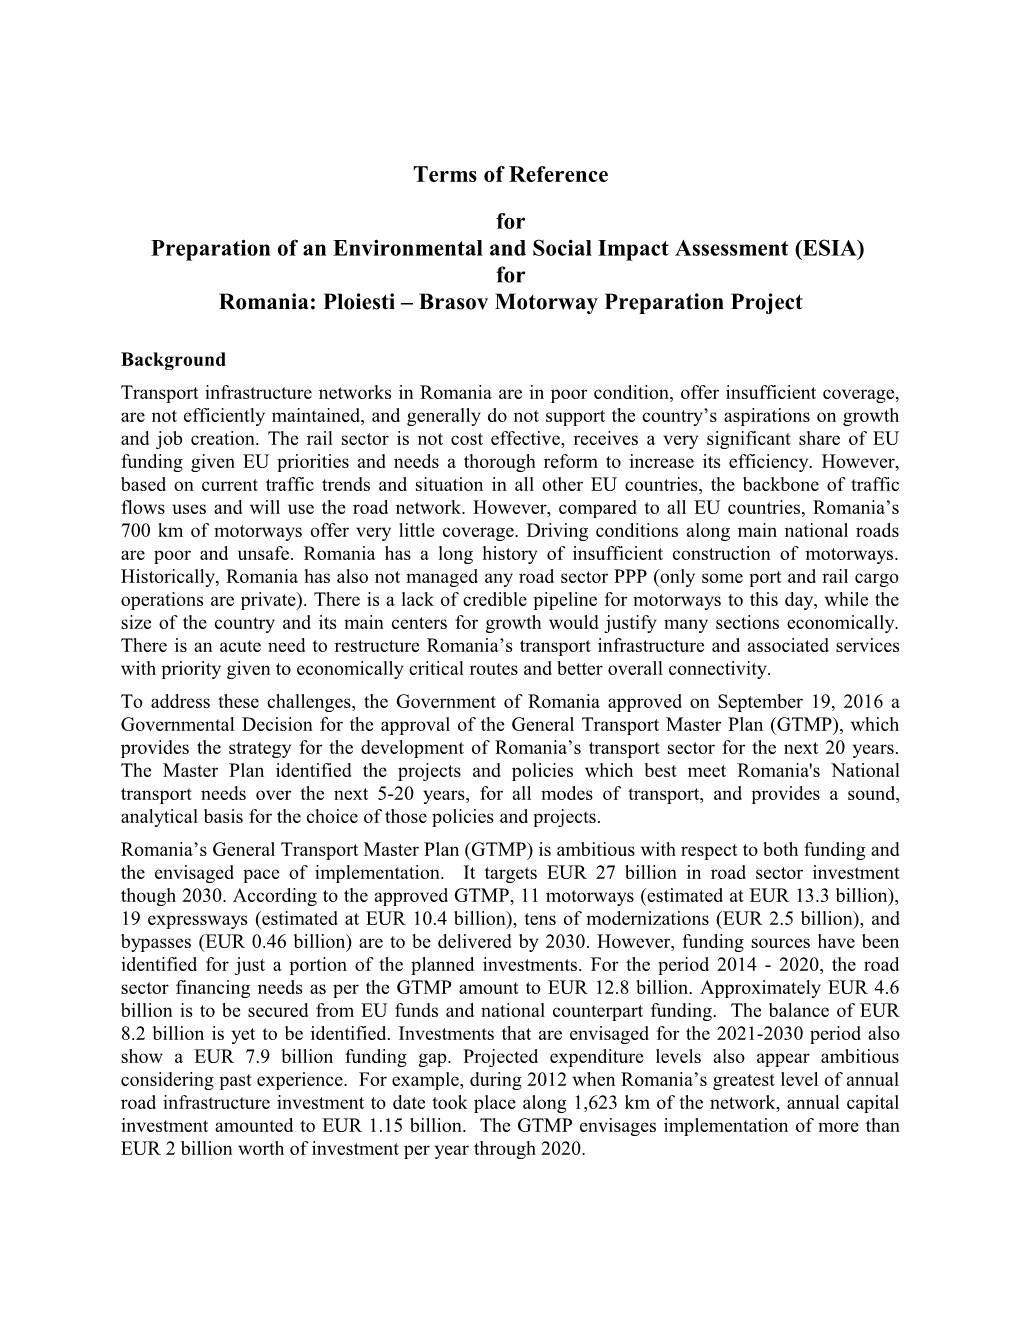 Preparation of an Environmental and Social Impact Assessment (ESIA)